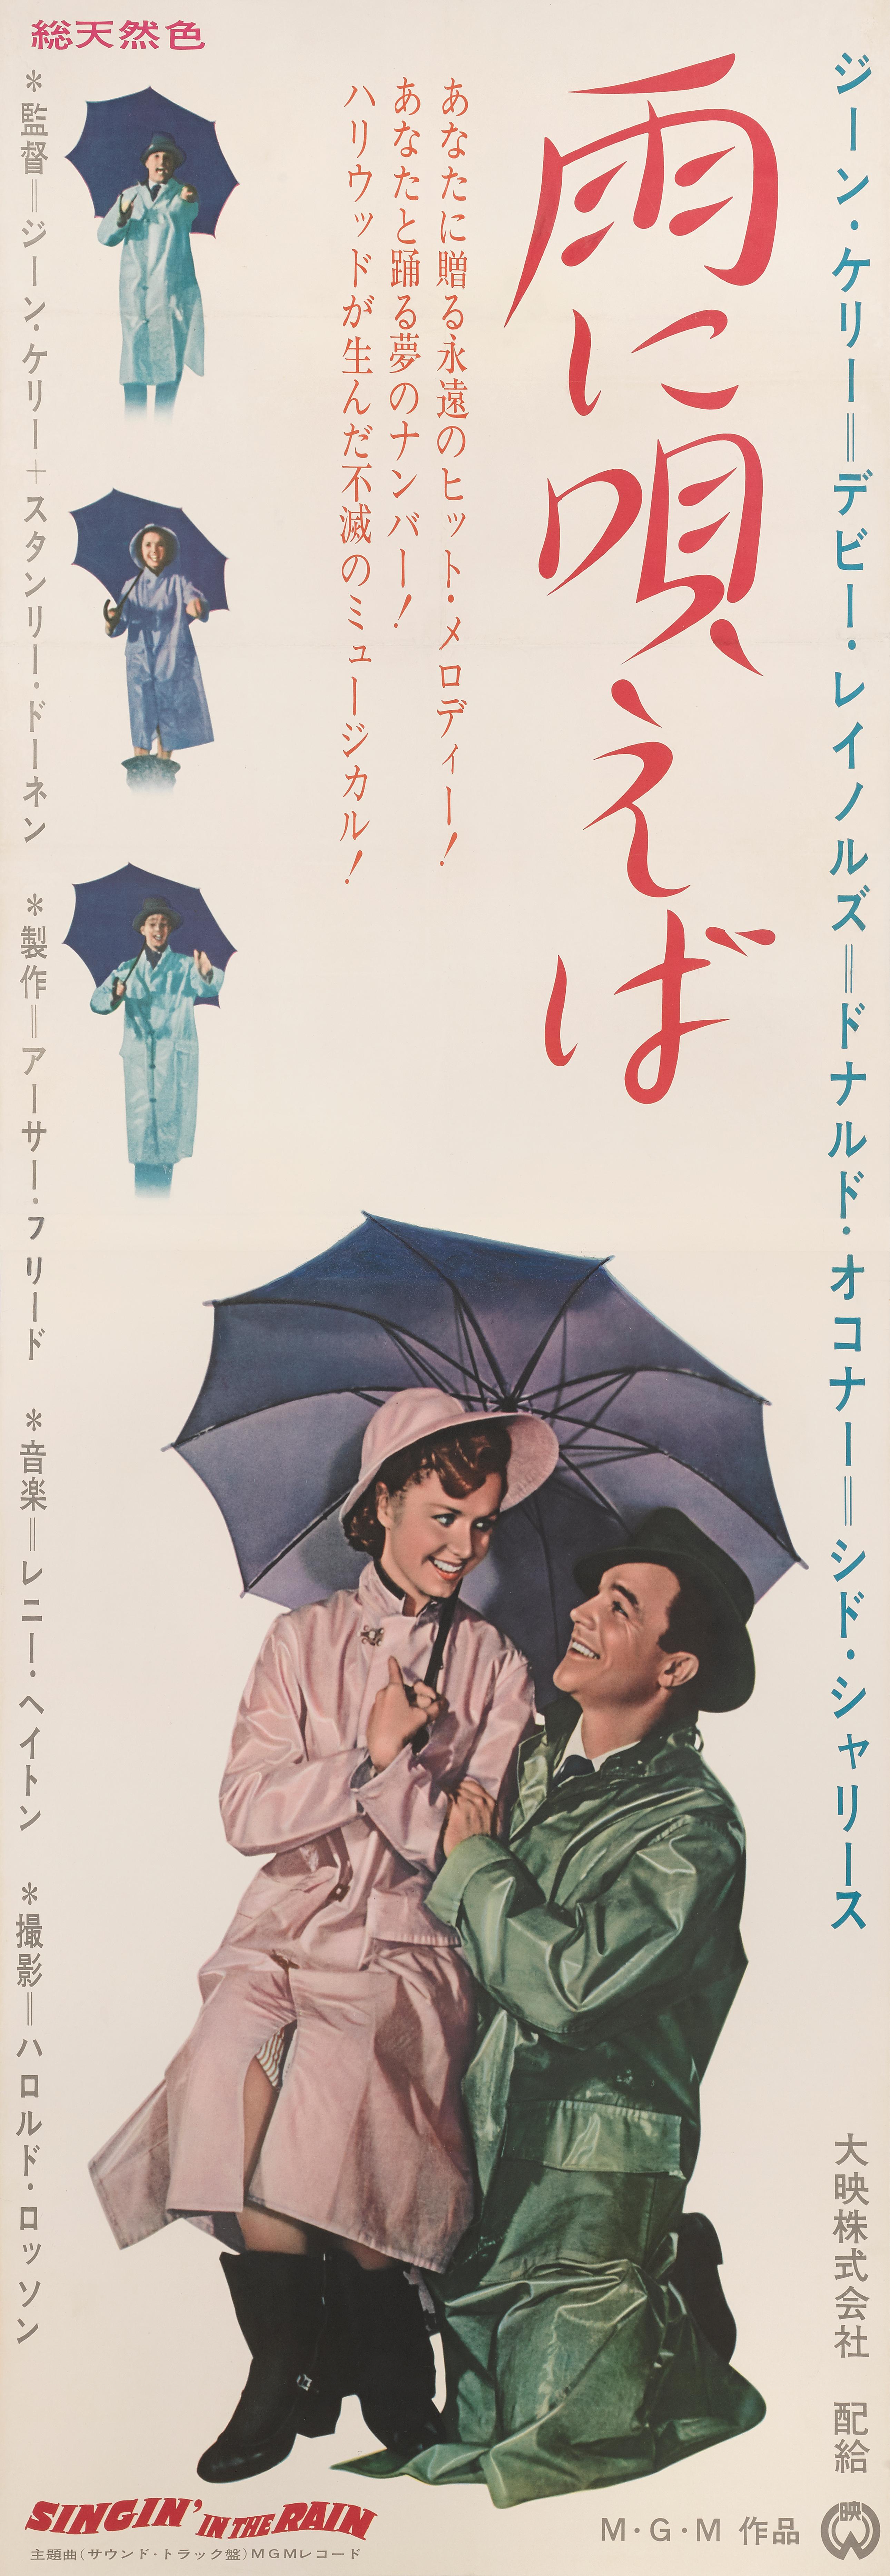 Japanese Singin' in the Rain For Sale